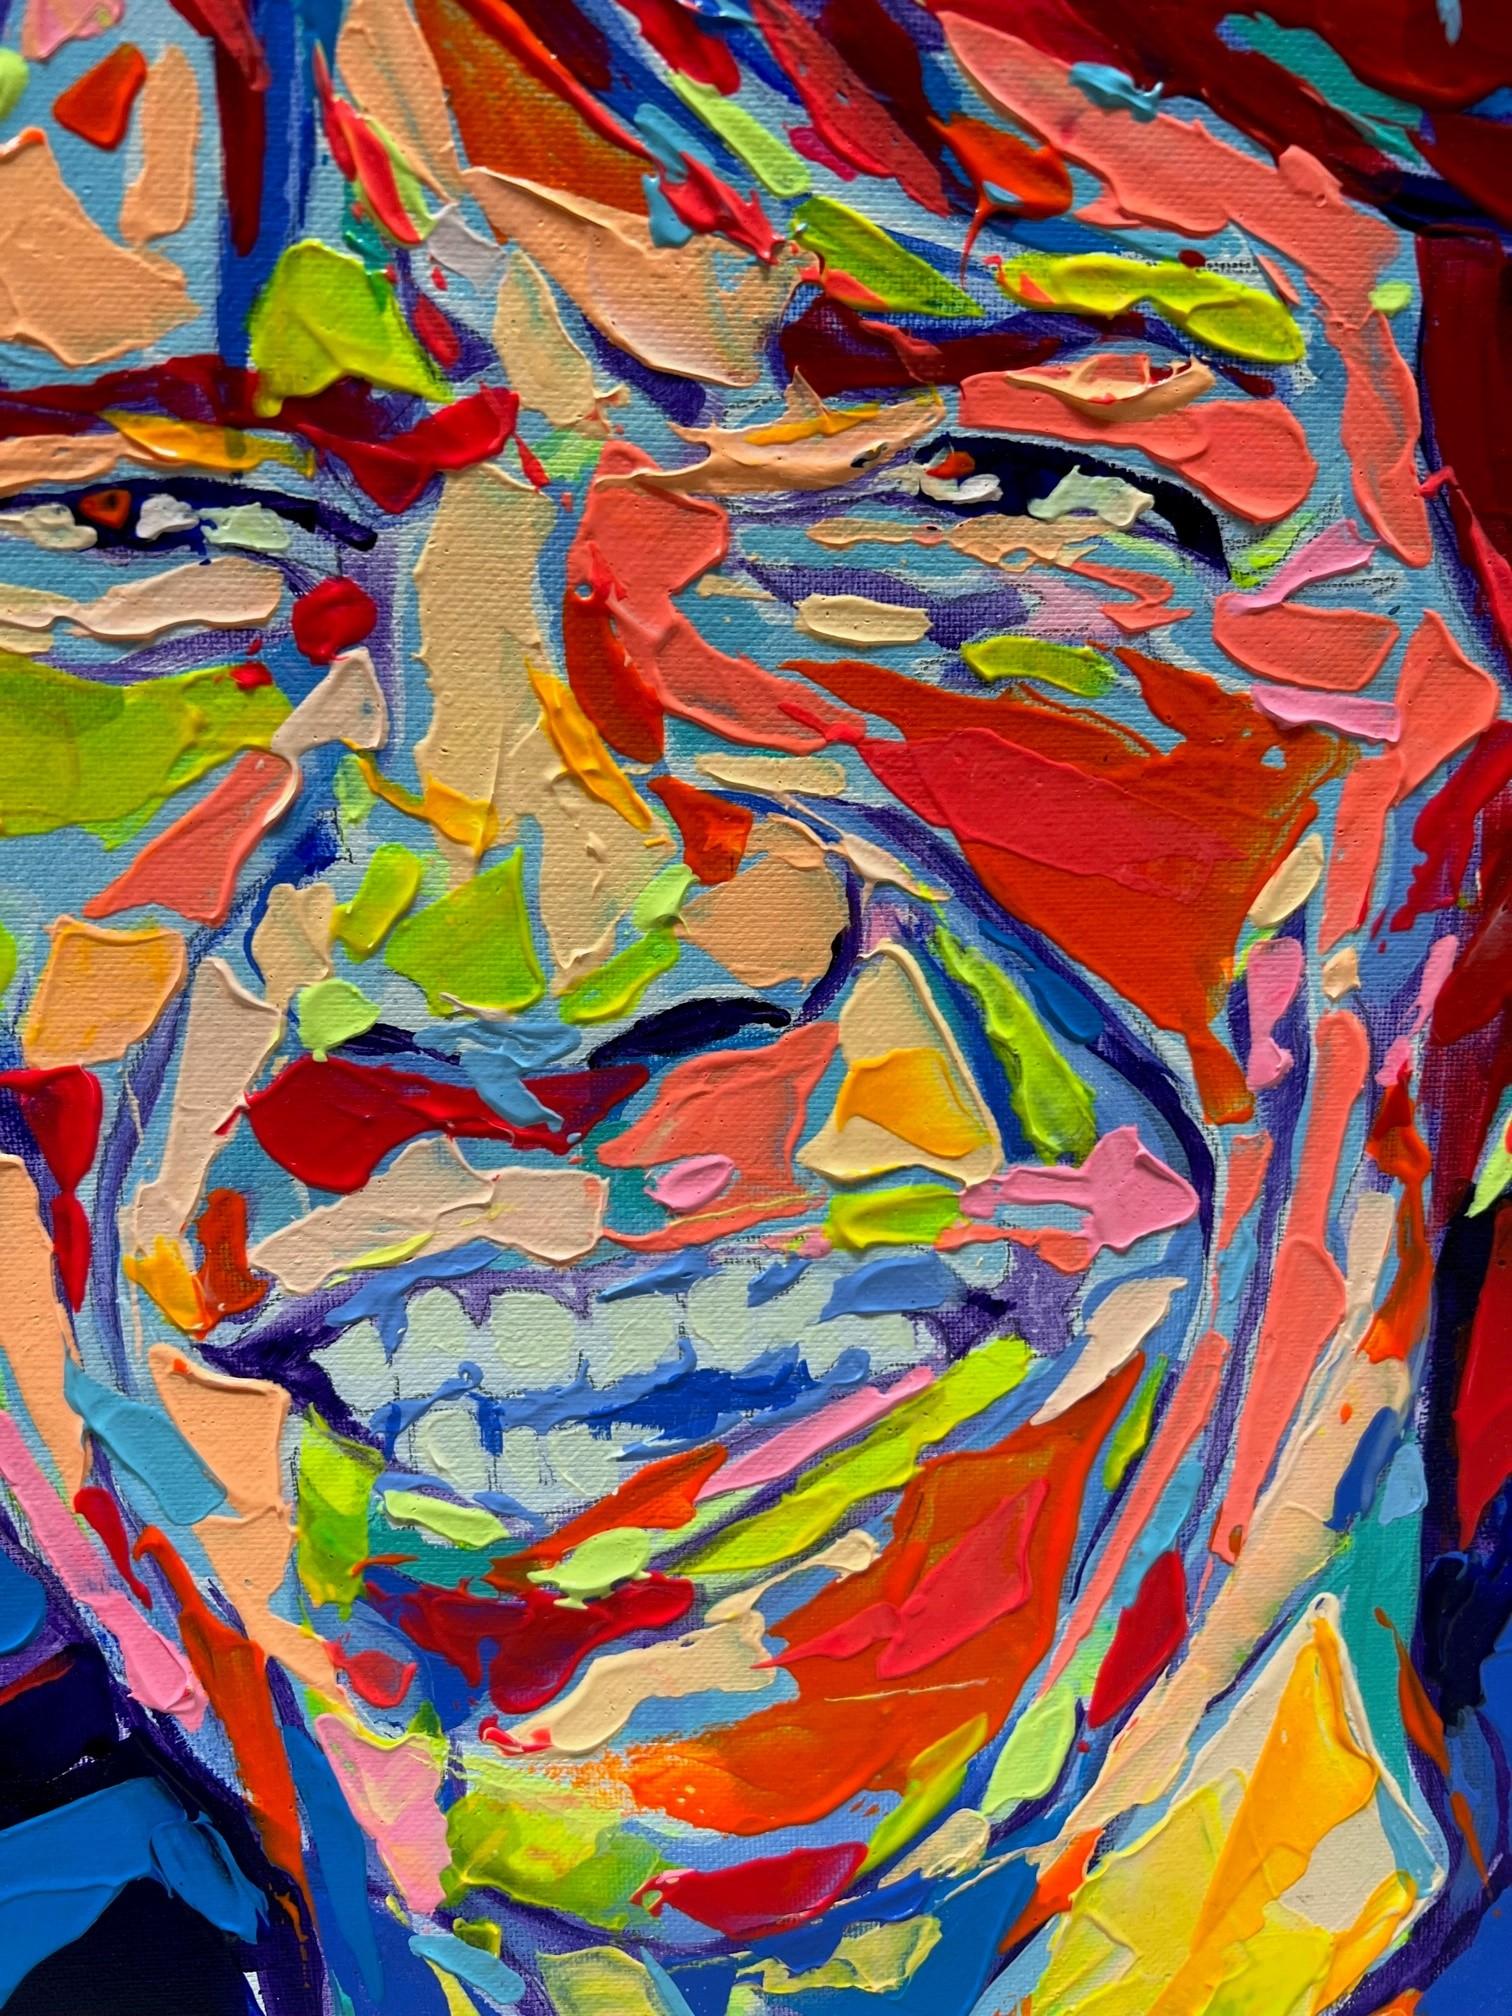 Rolling Stones - Pop Art Painting by Federico Lopez